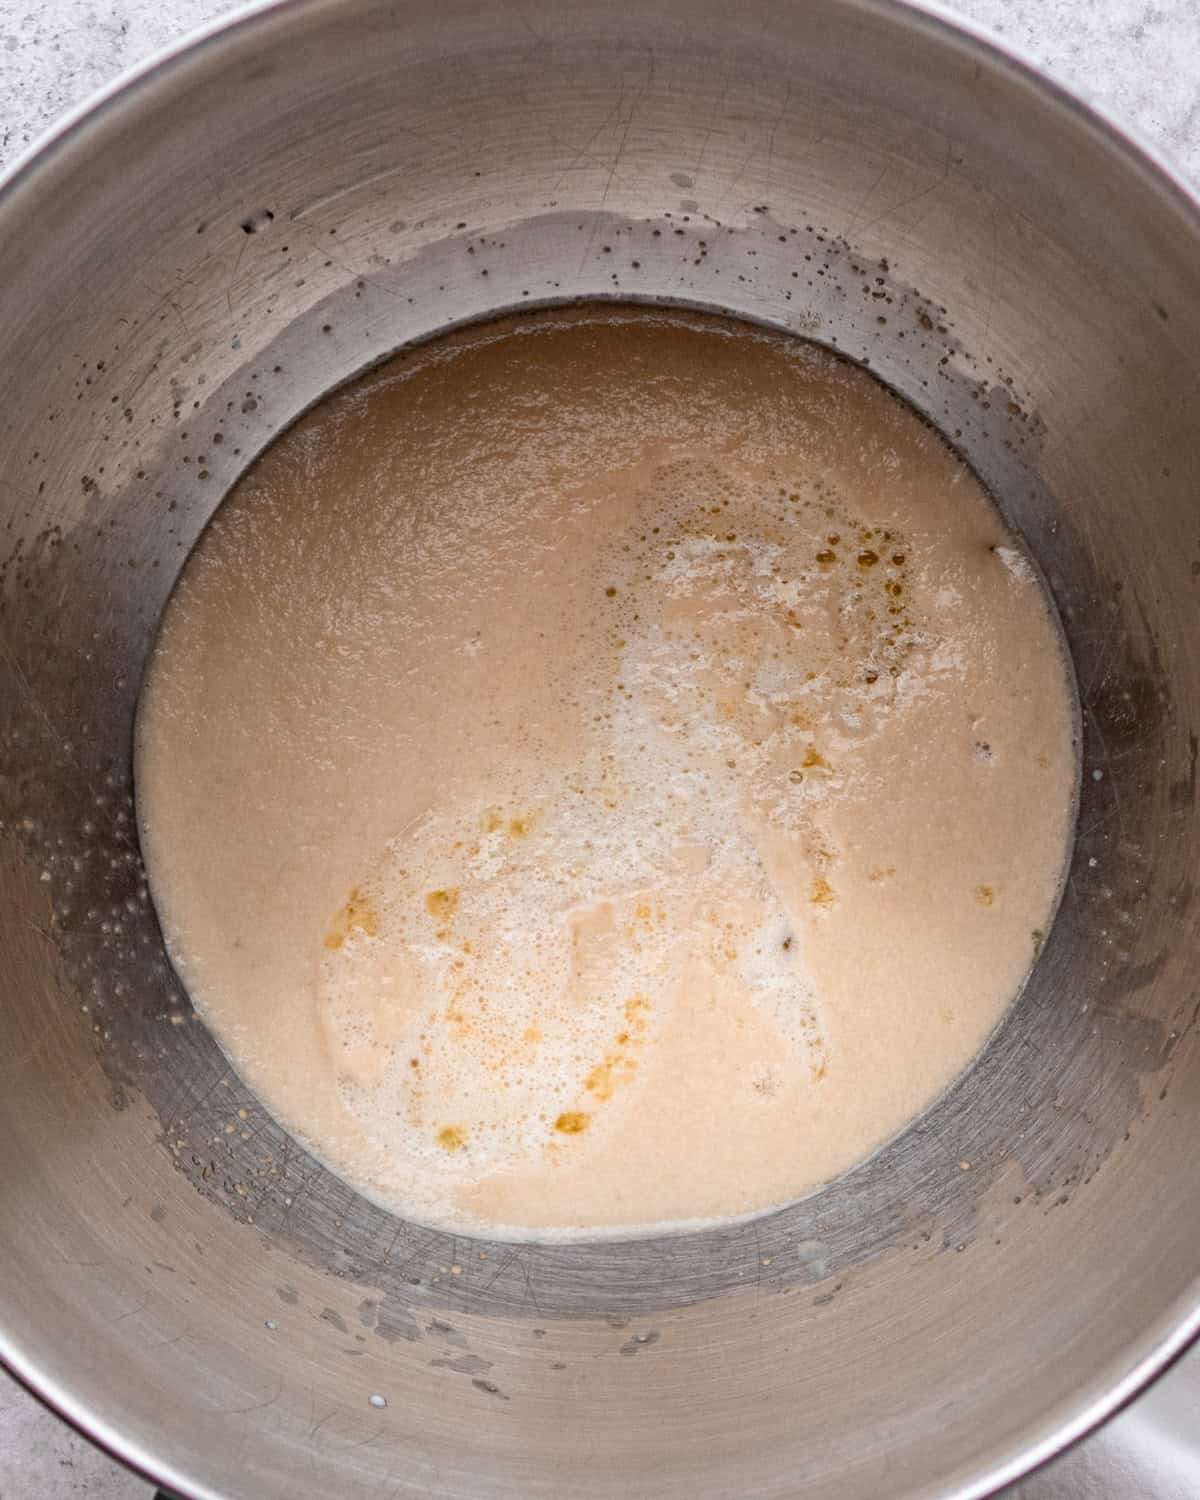 How to Make Pretzel Bread - wet ingredients added to proofed yeast before stirring